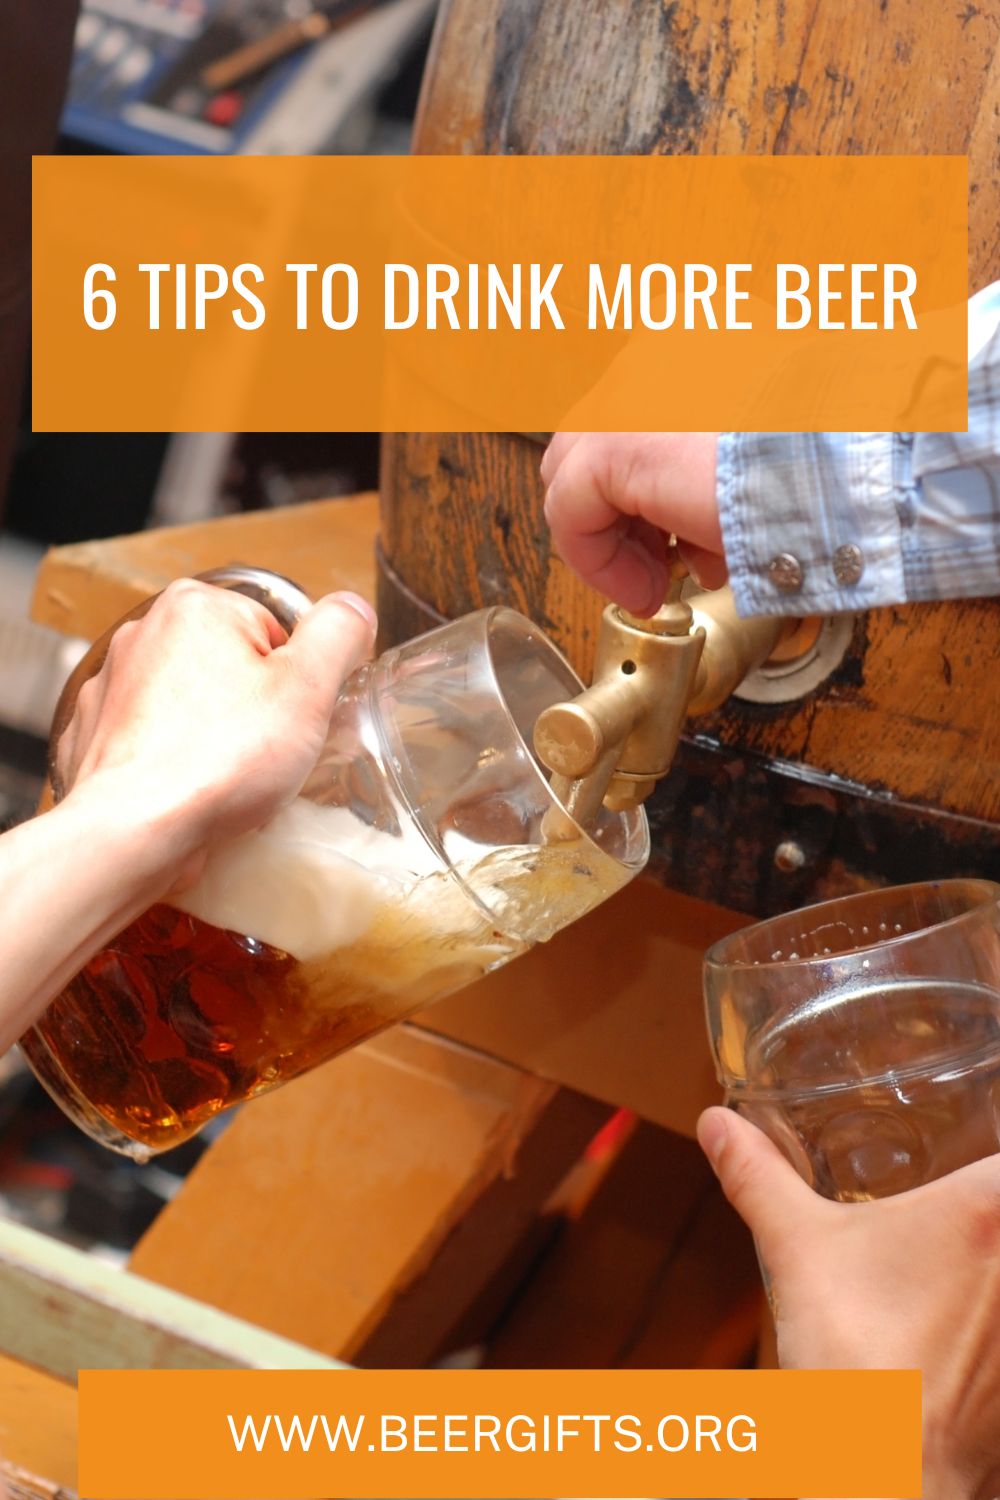 6 Tips to Drink More Beer1